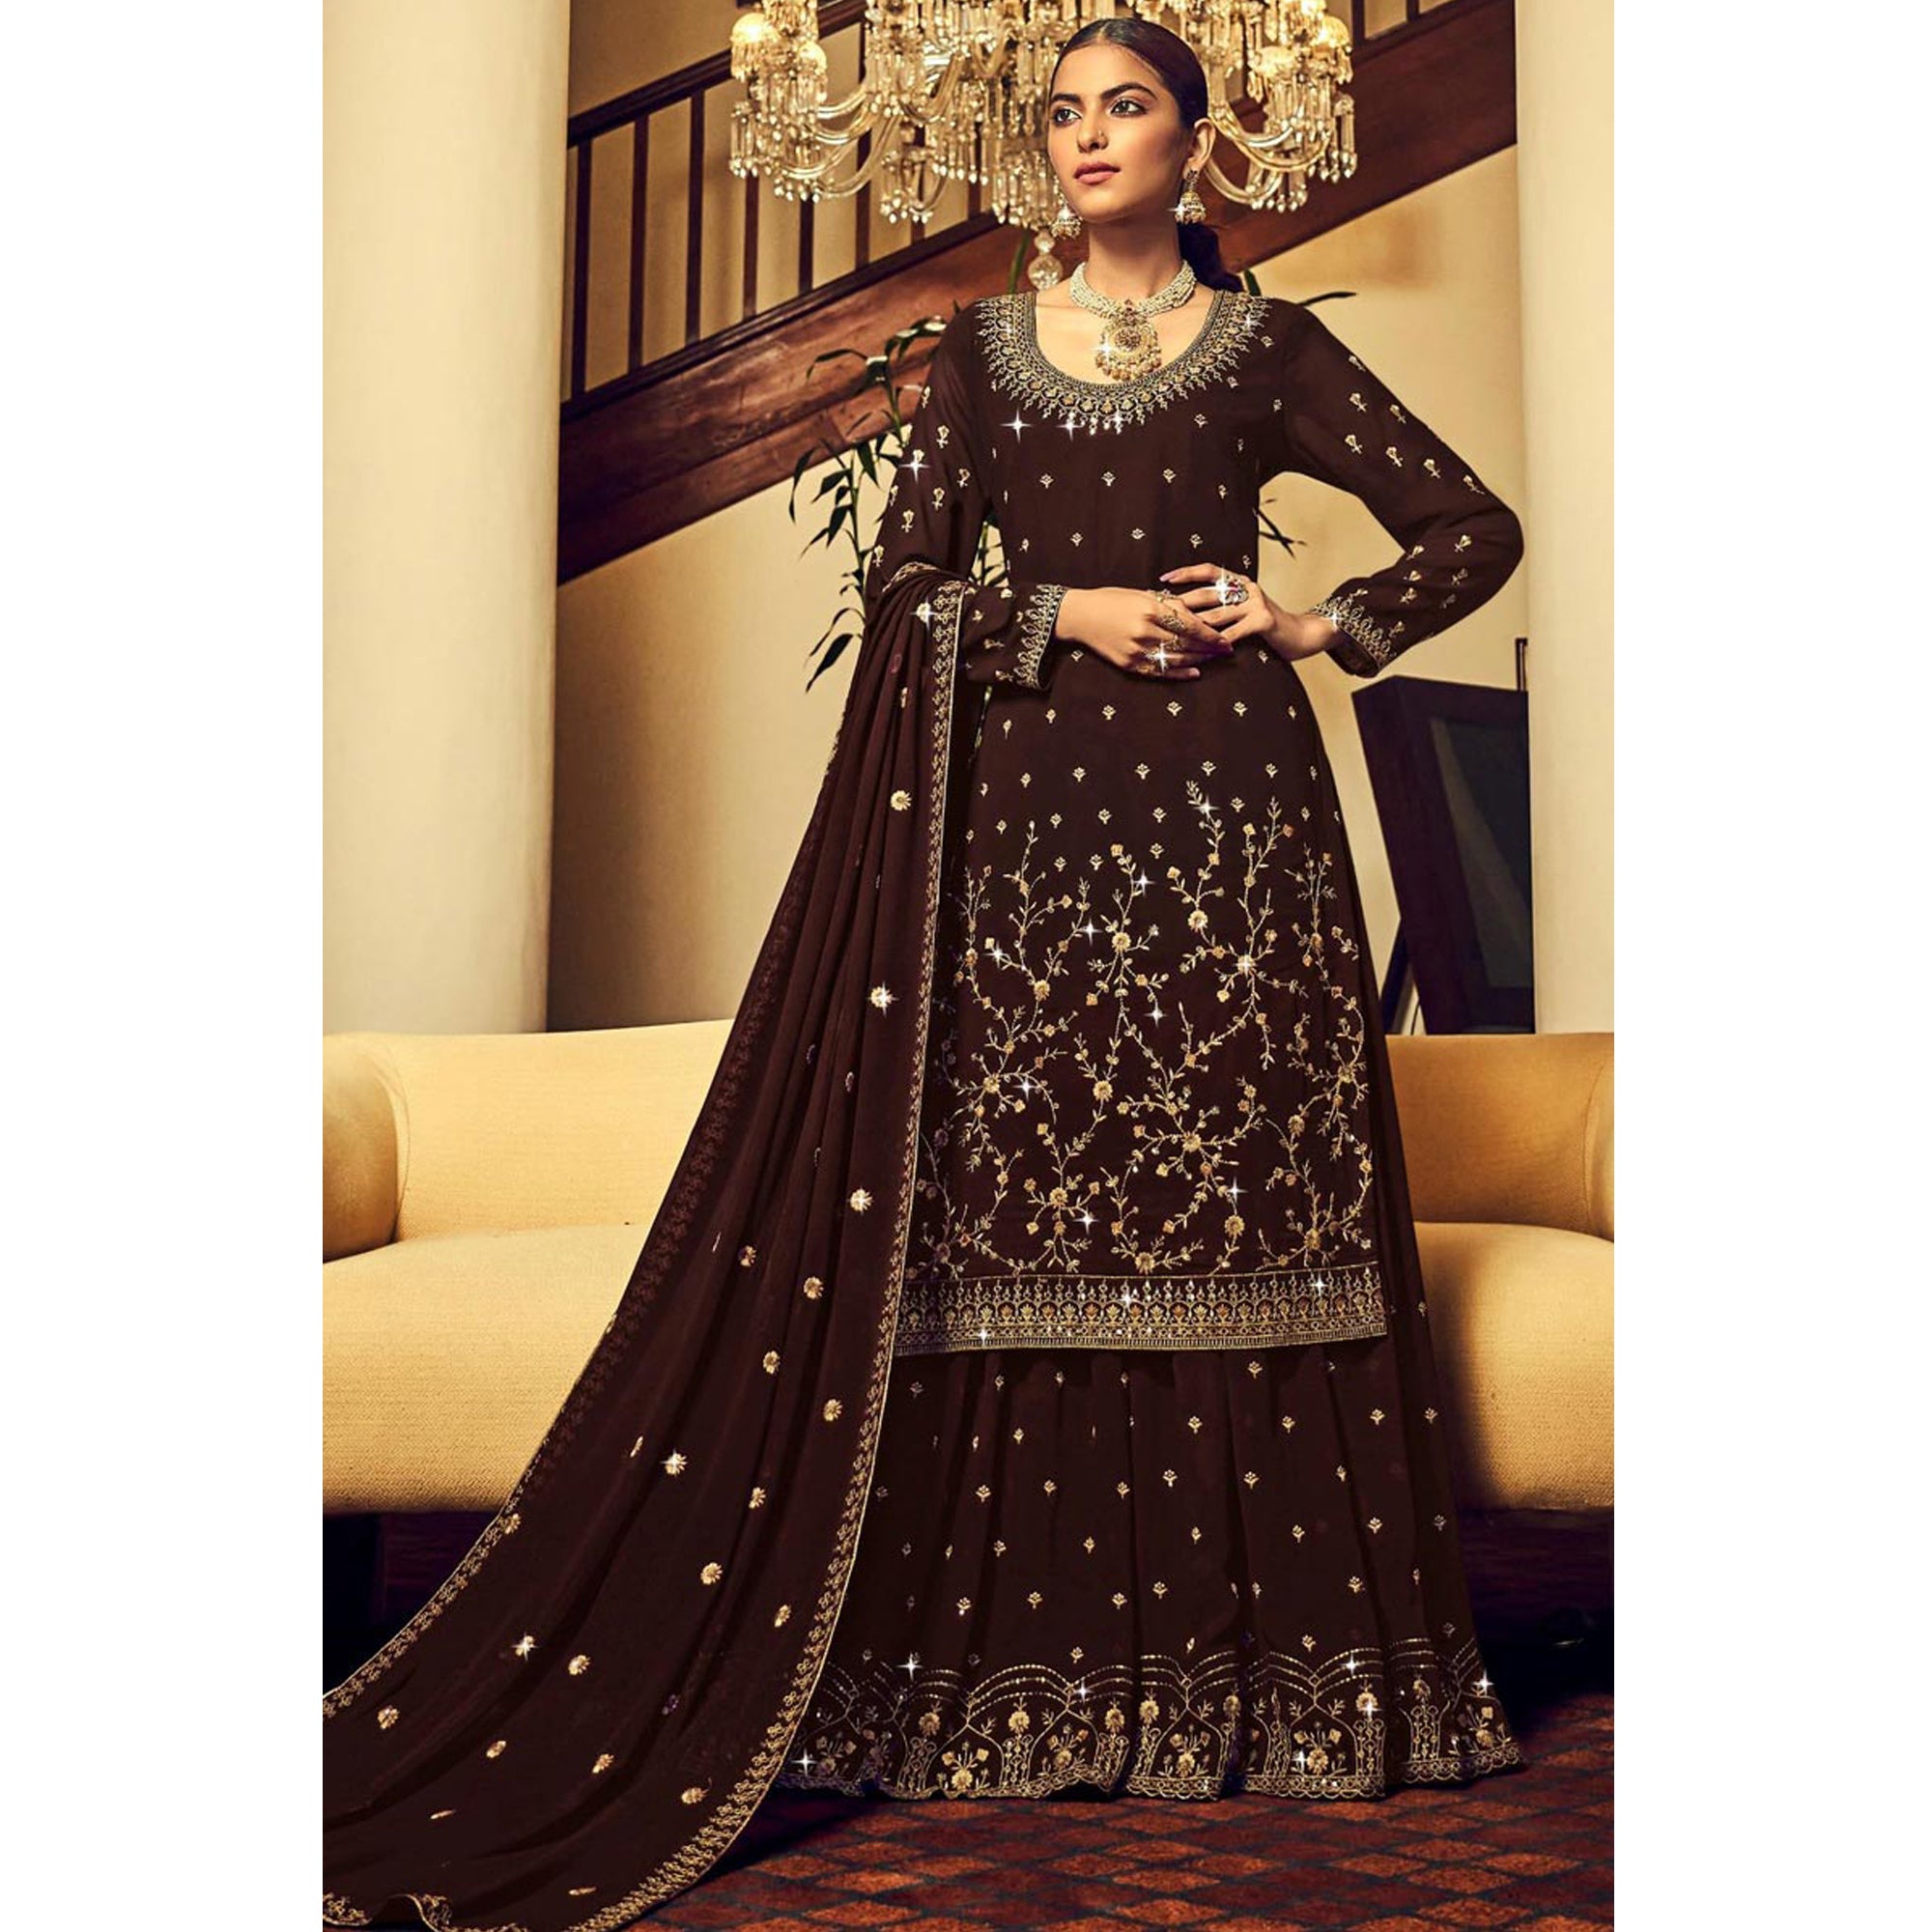 Tarditional Style Marron Color Embroidery Worked Stitched Designer Function Wear Sharara Top Lehenga